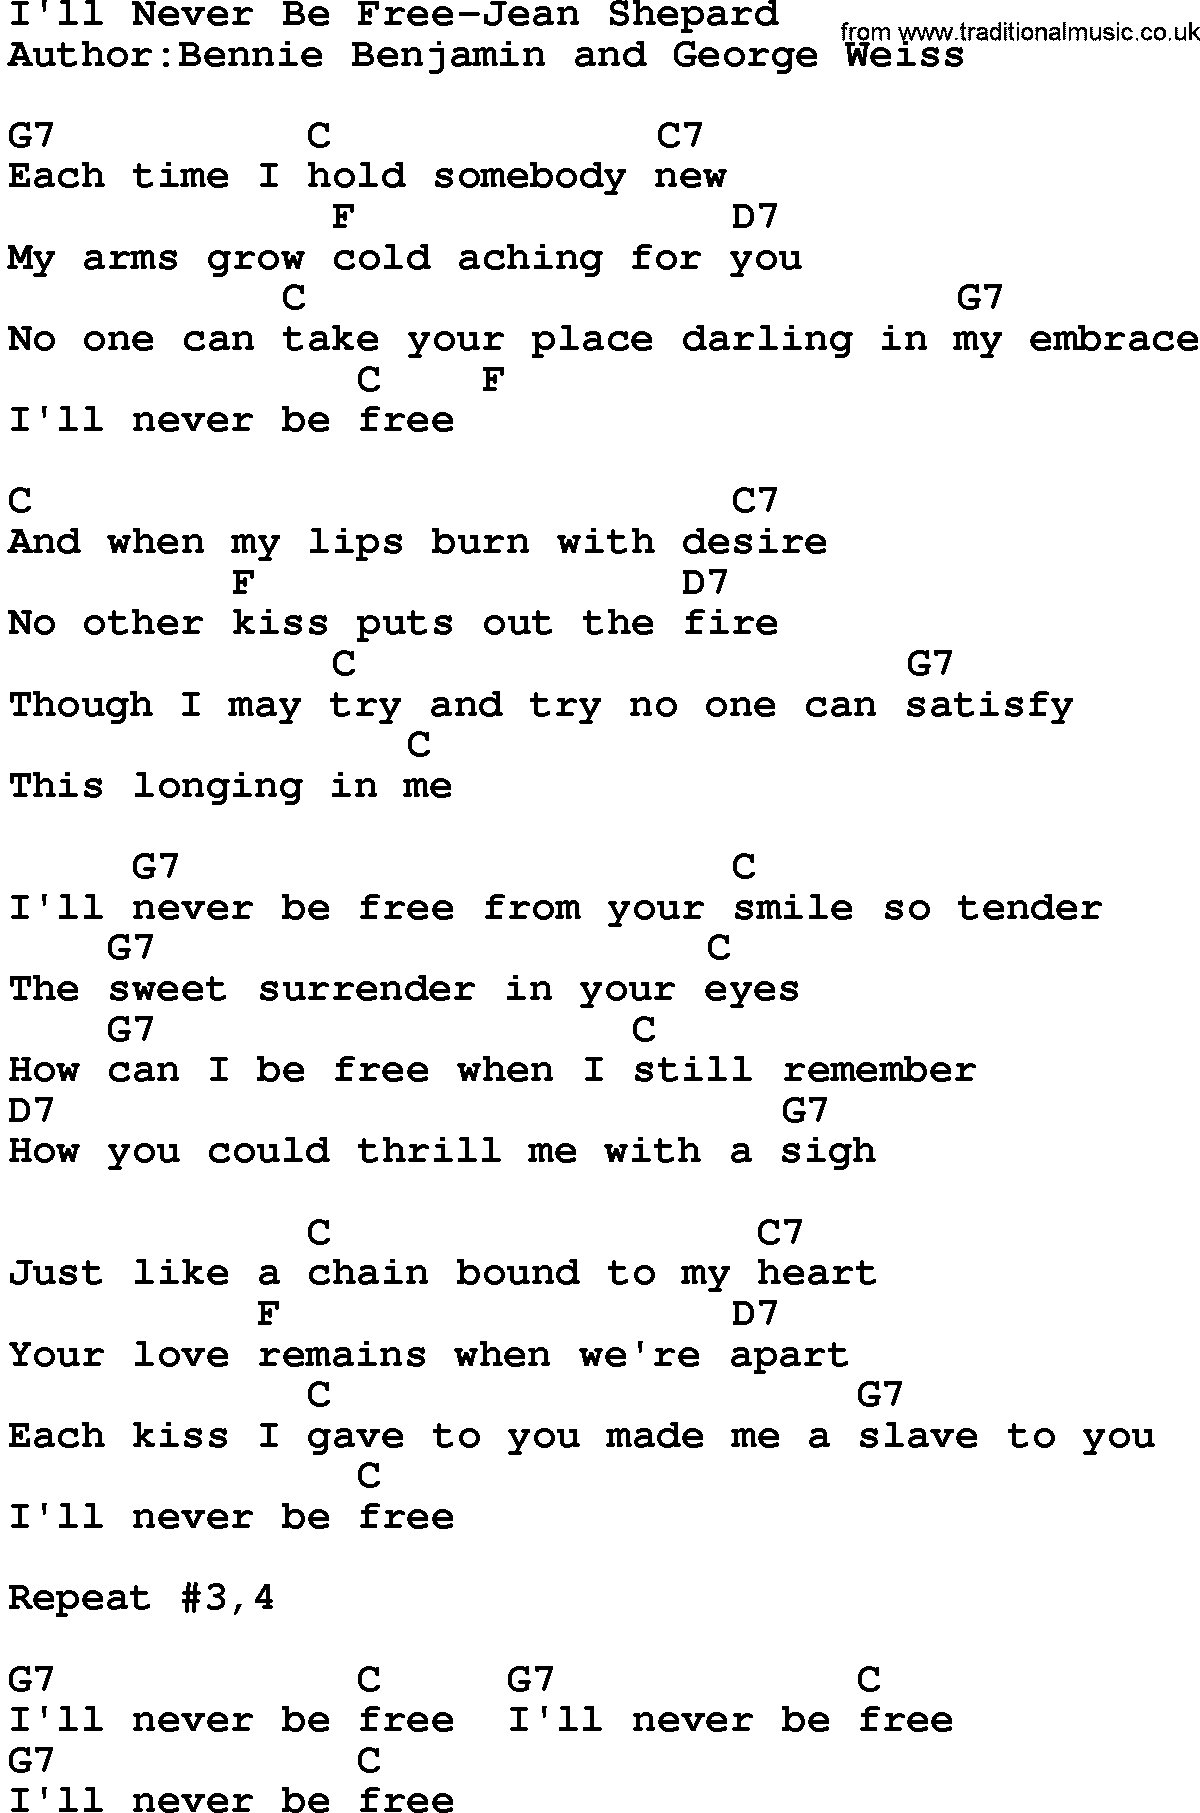 Country music song: I'll Never Be Free-Jean Shepard lyrics and chords